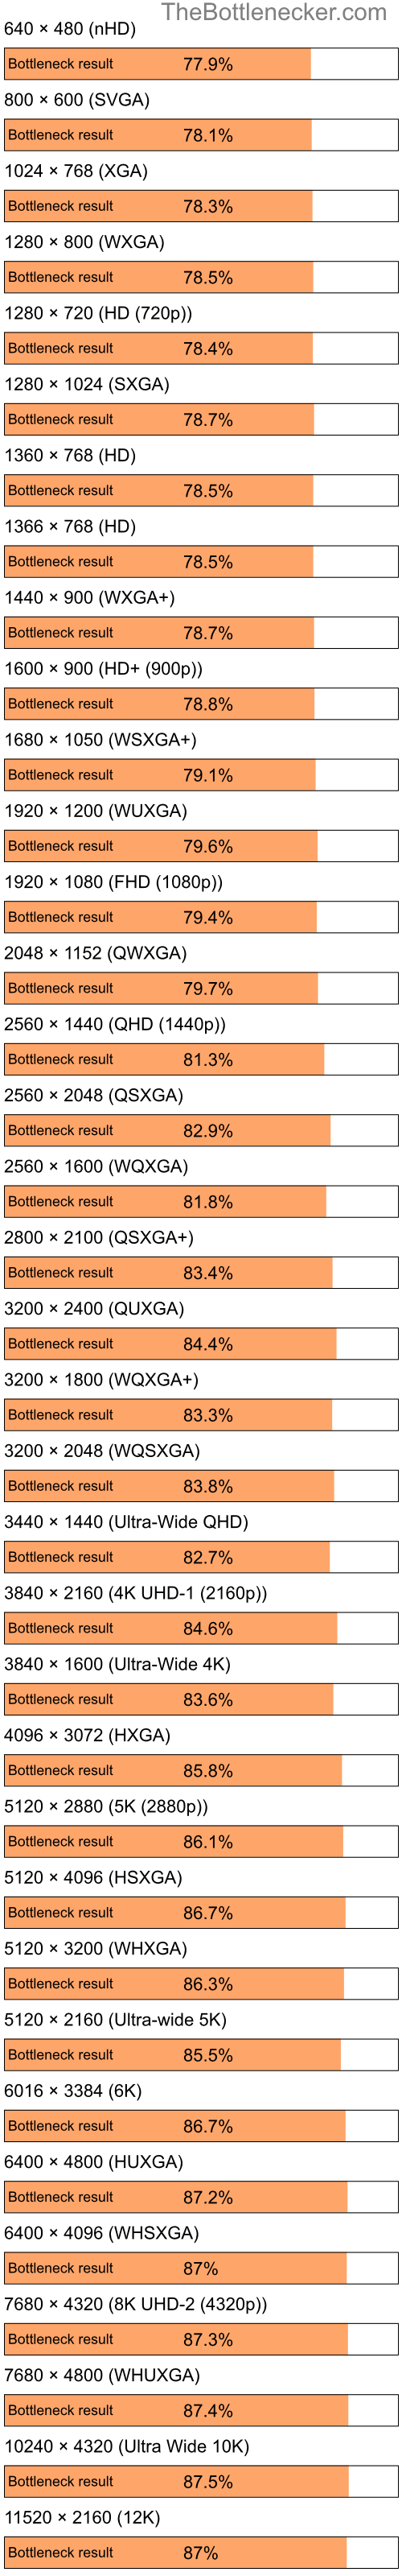 Bottleneck results by resolution for Intel Atom Z520 and AMD Radeon 9550 in7 Days to Die